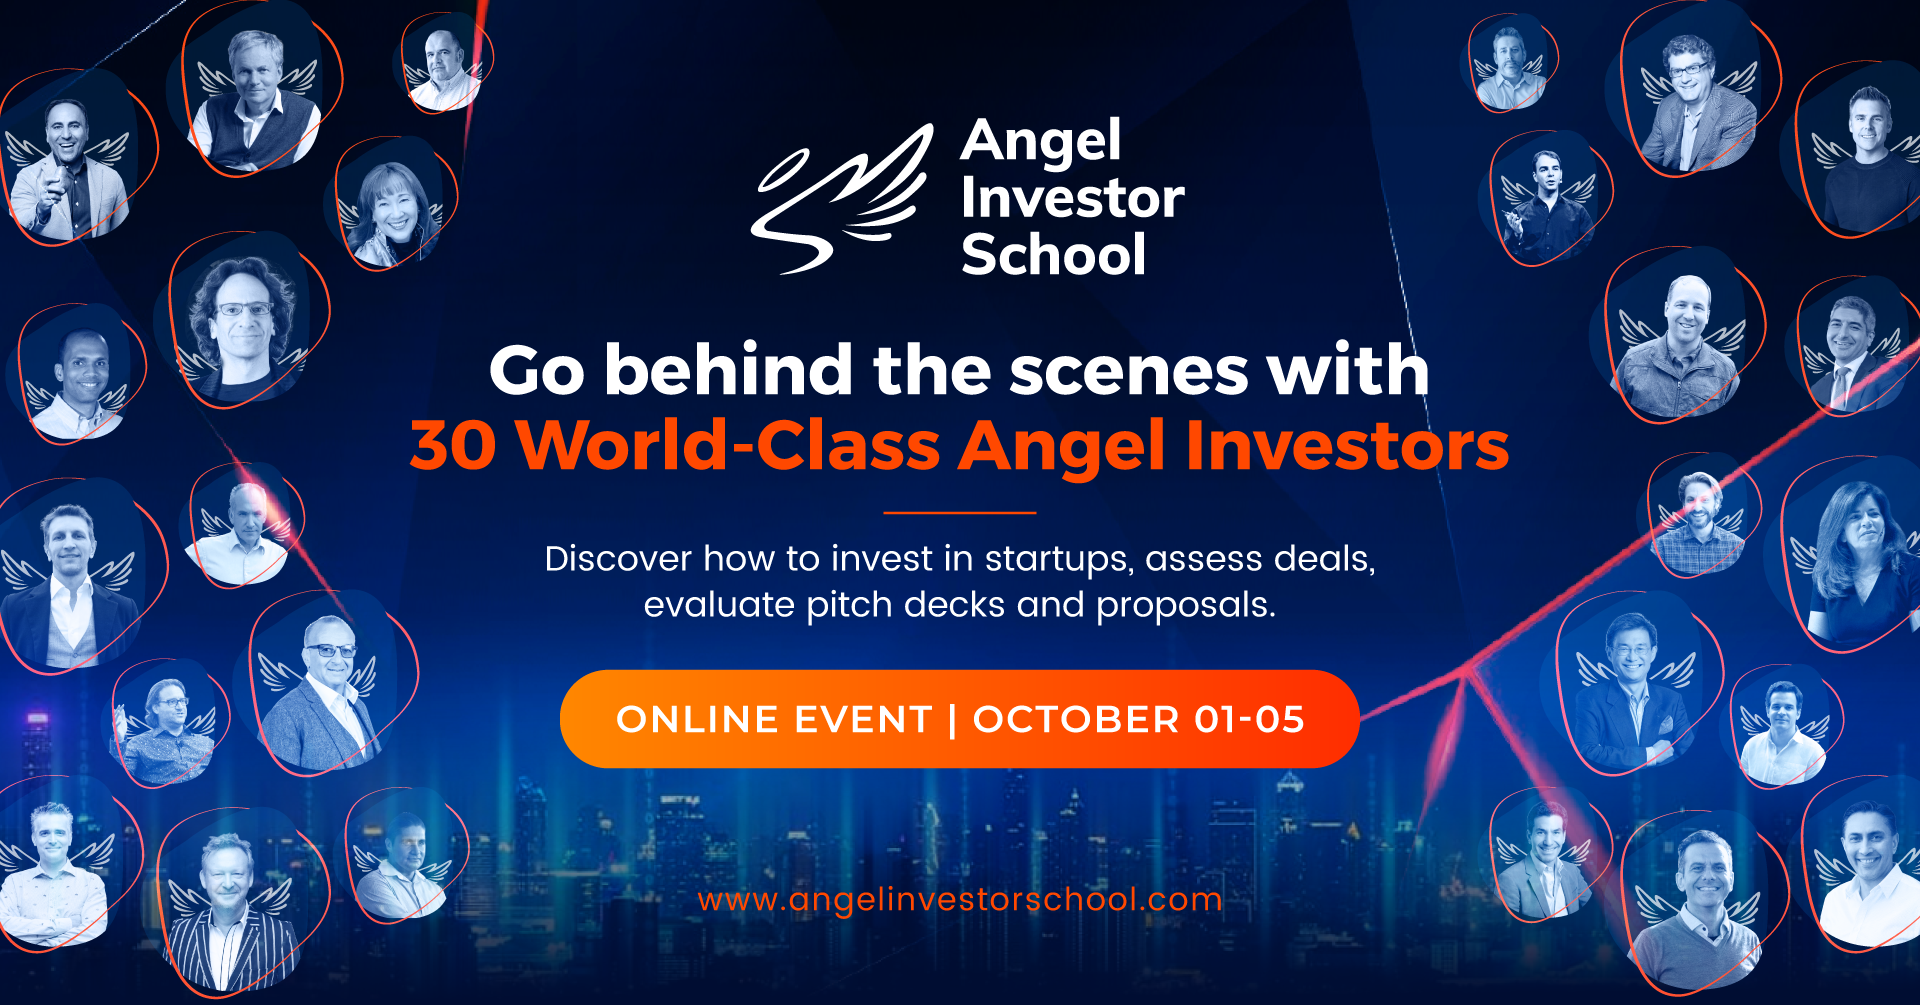 Top business angels show how angel investing can save the startup world